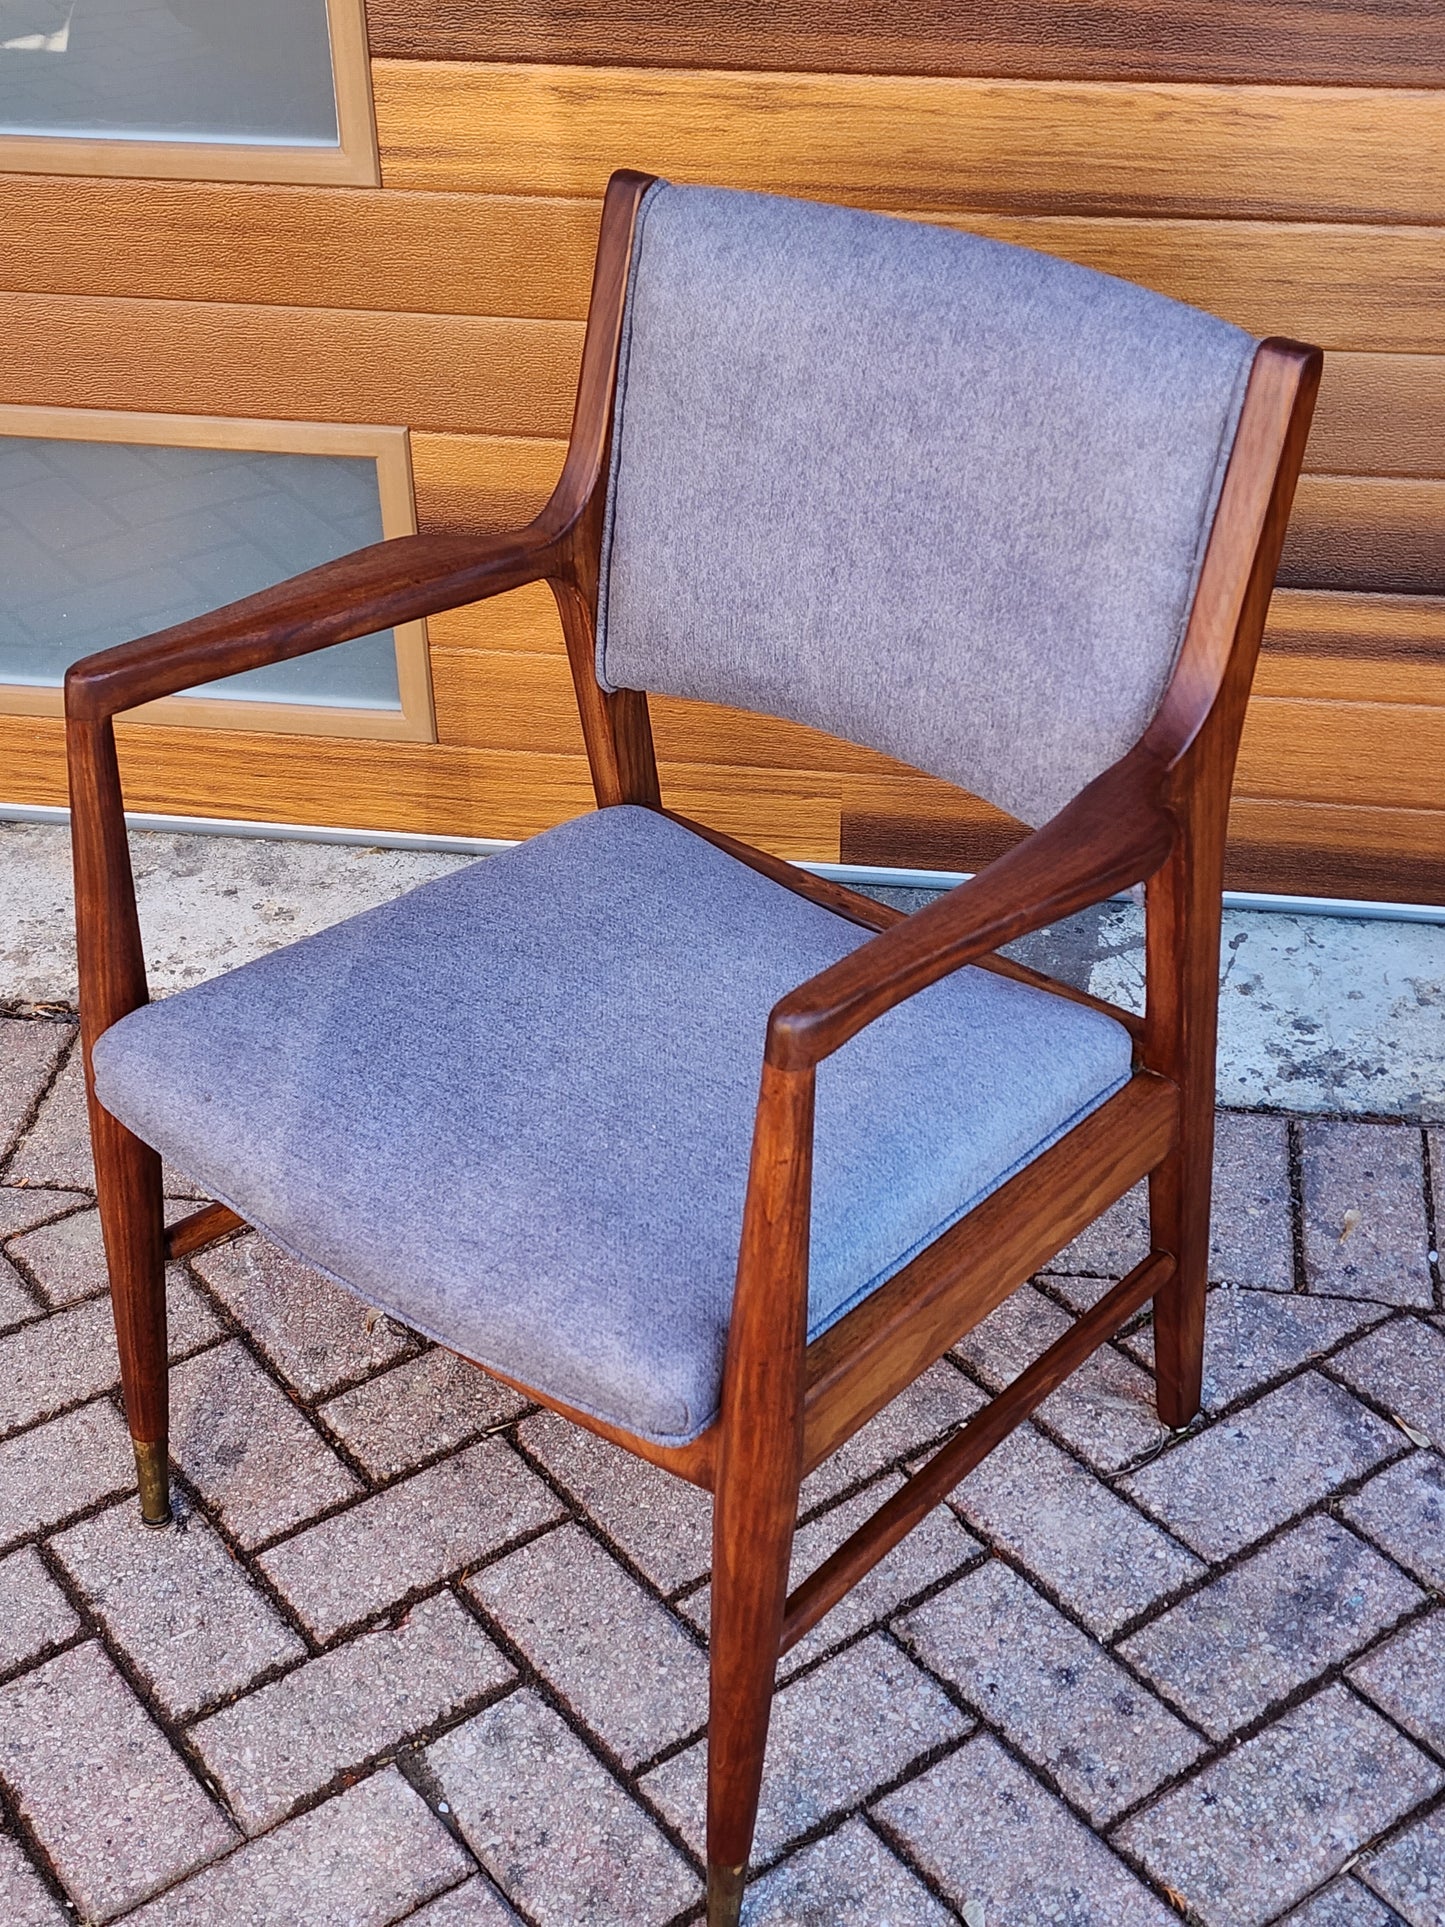 2 REFINISHED REUPHOLSTERED Mid Century Modern Walnut Arm Chairs